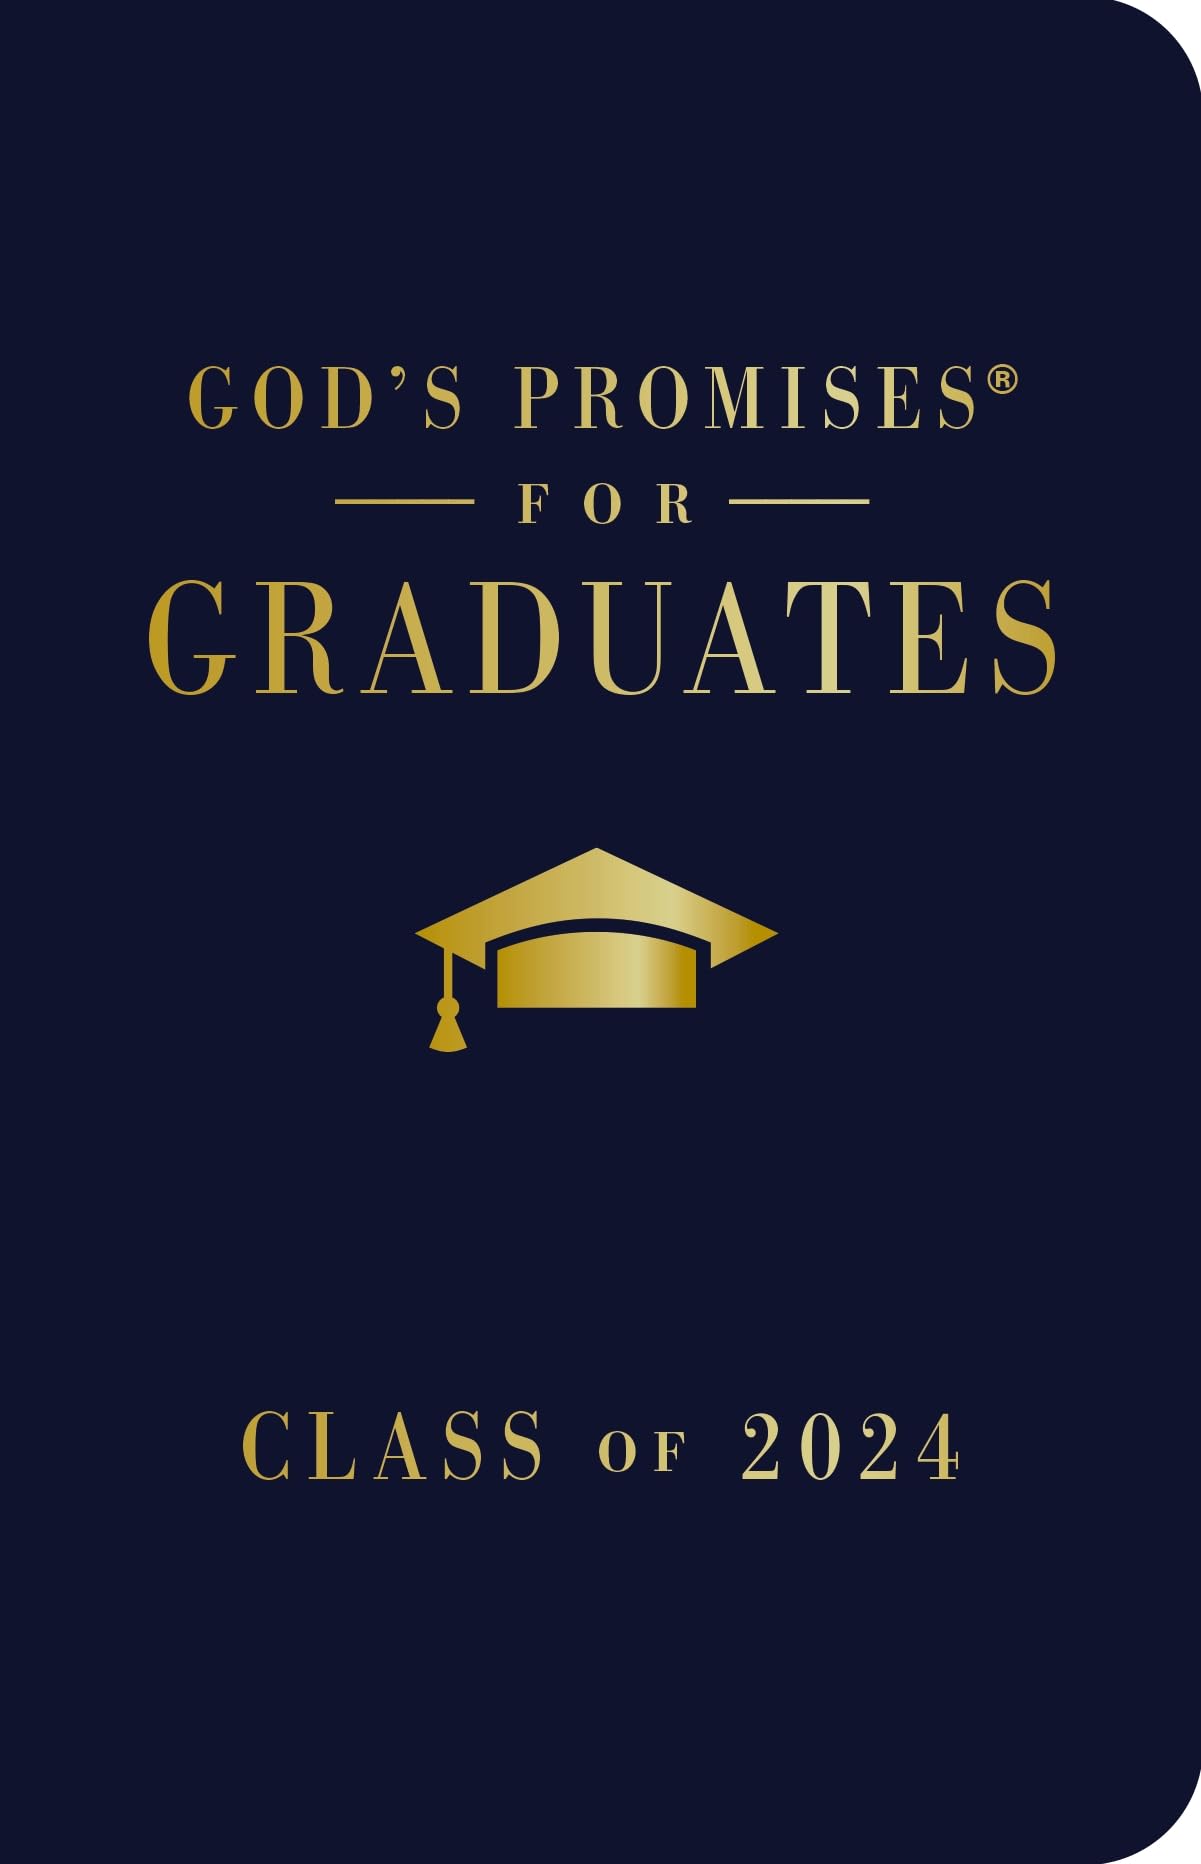 God's Promises for Graduates: Class of 2024 - Navy NKJV: New King James Version by Countryman, Jack